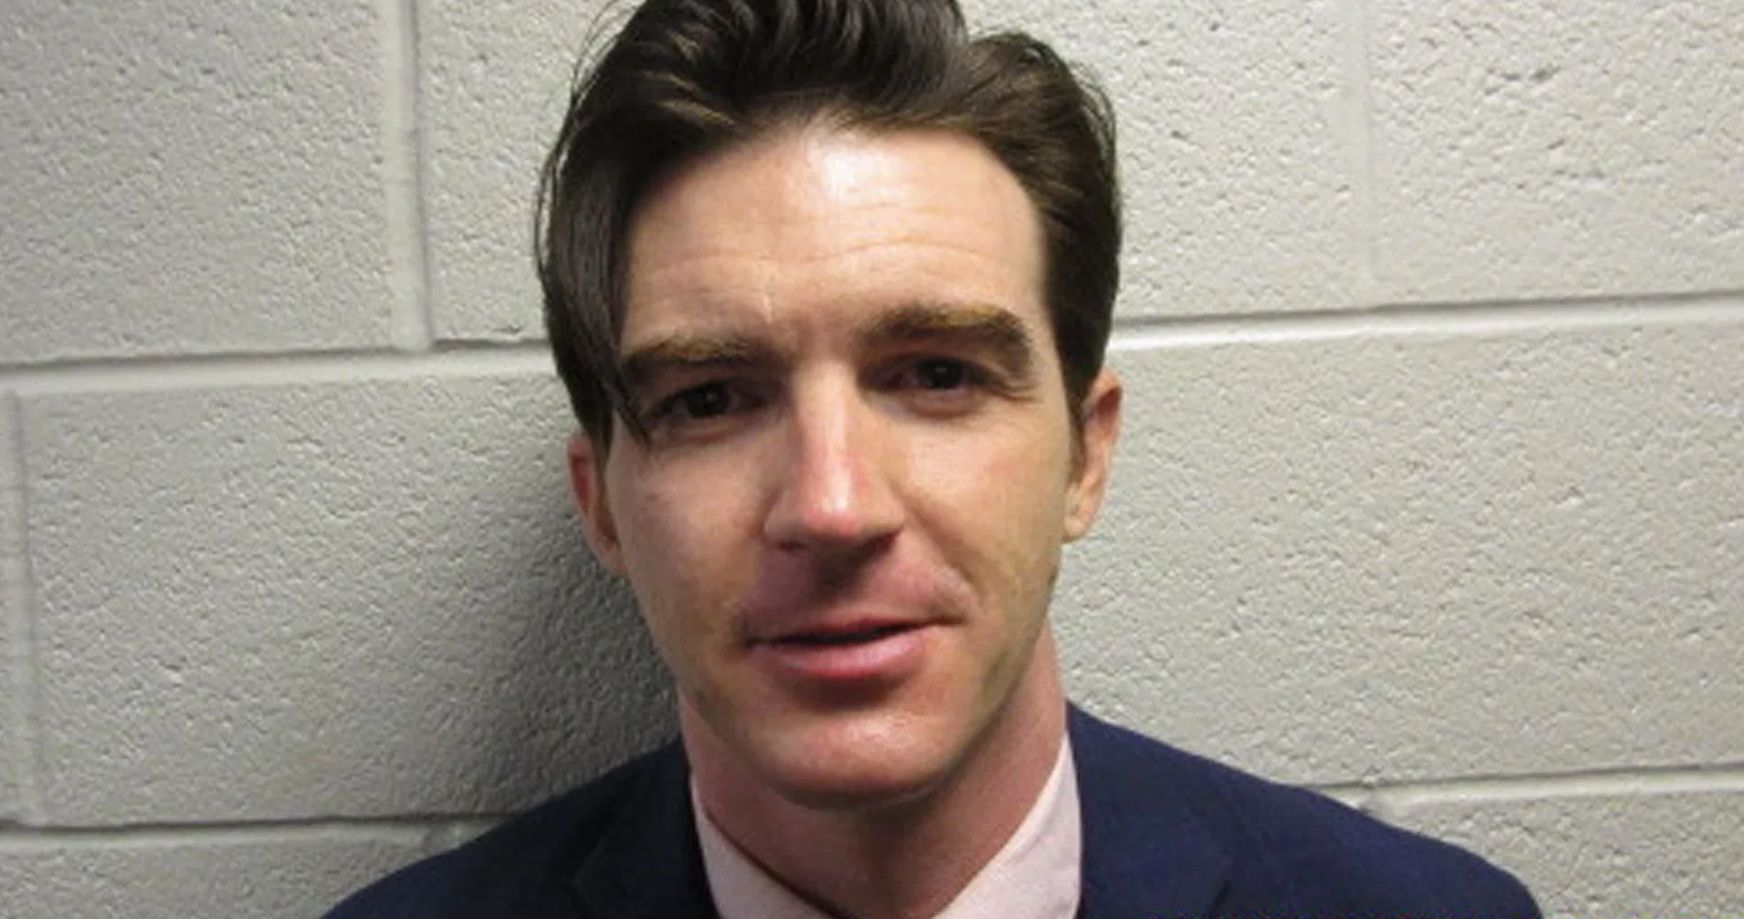 Drake Bell Sentenced to 2 Years of Probation After Pleading Guilty to Child Endangerment